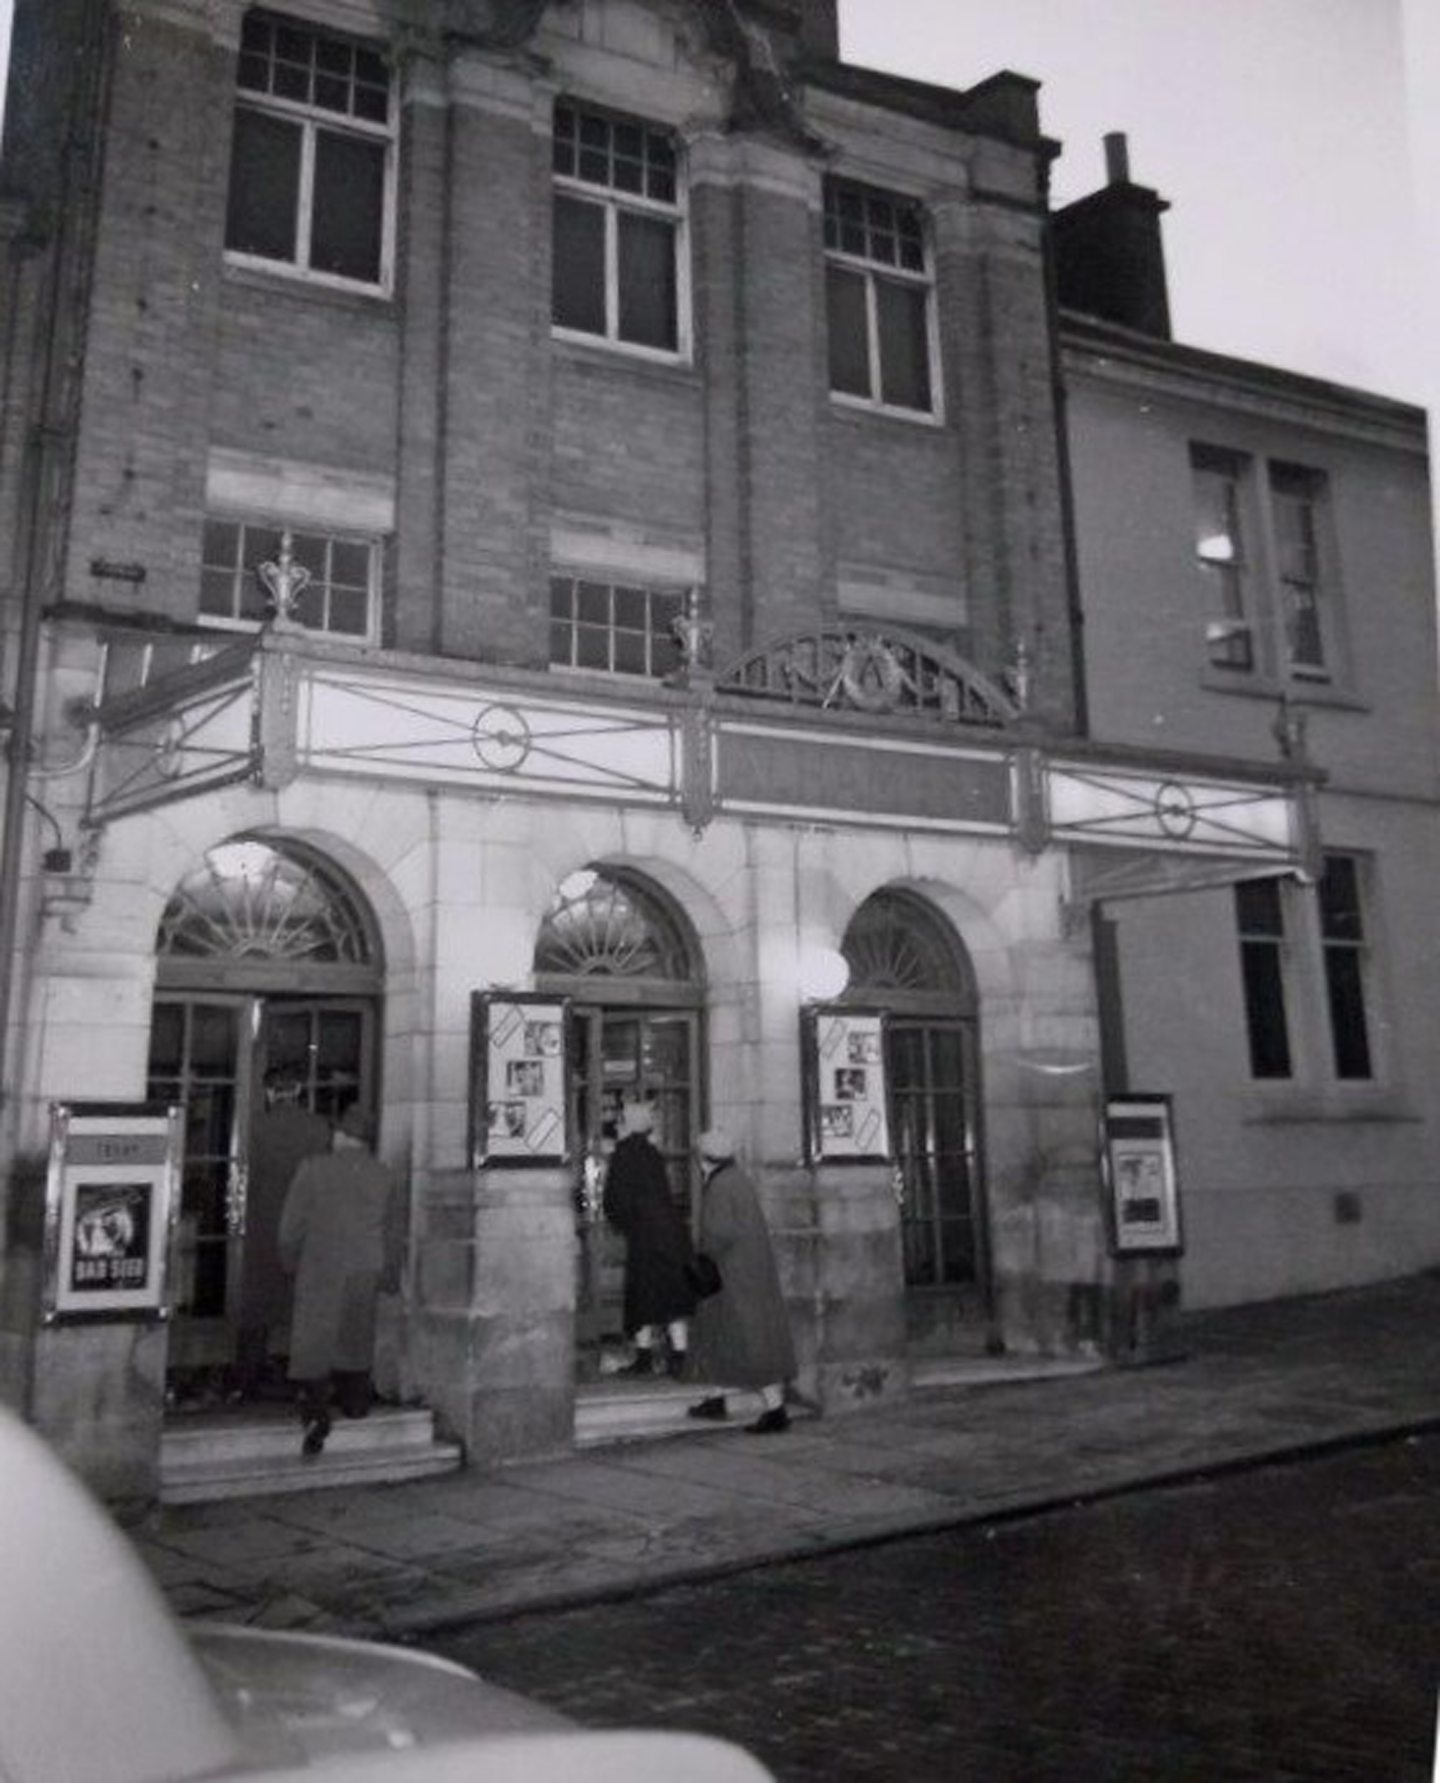 The theatre was home to one of Scotland's biggest theatre stages.